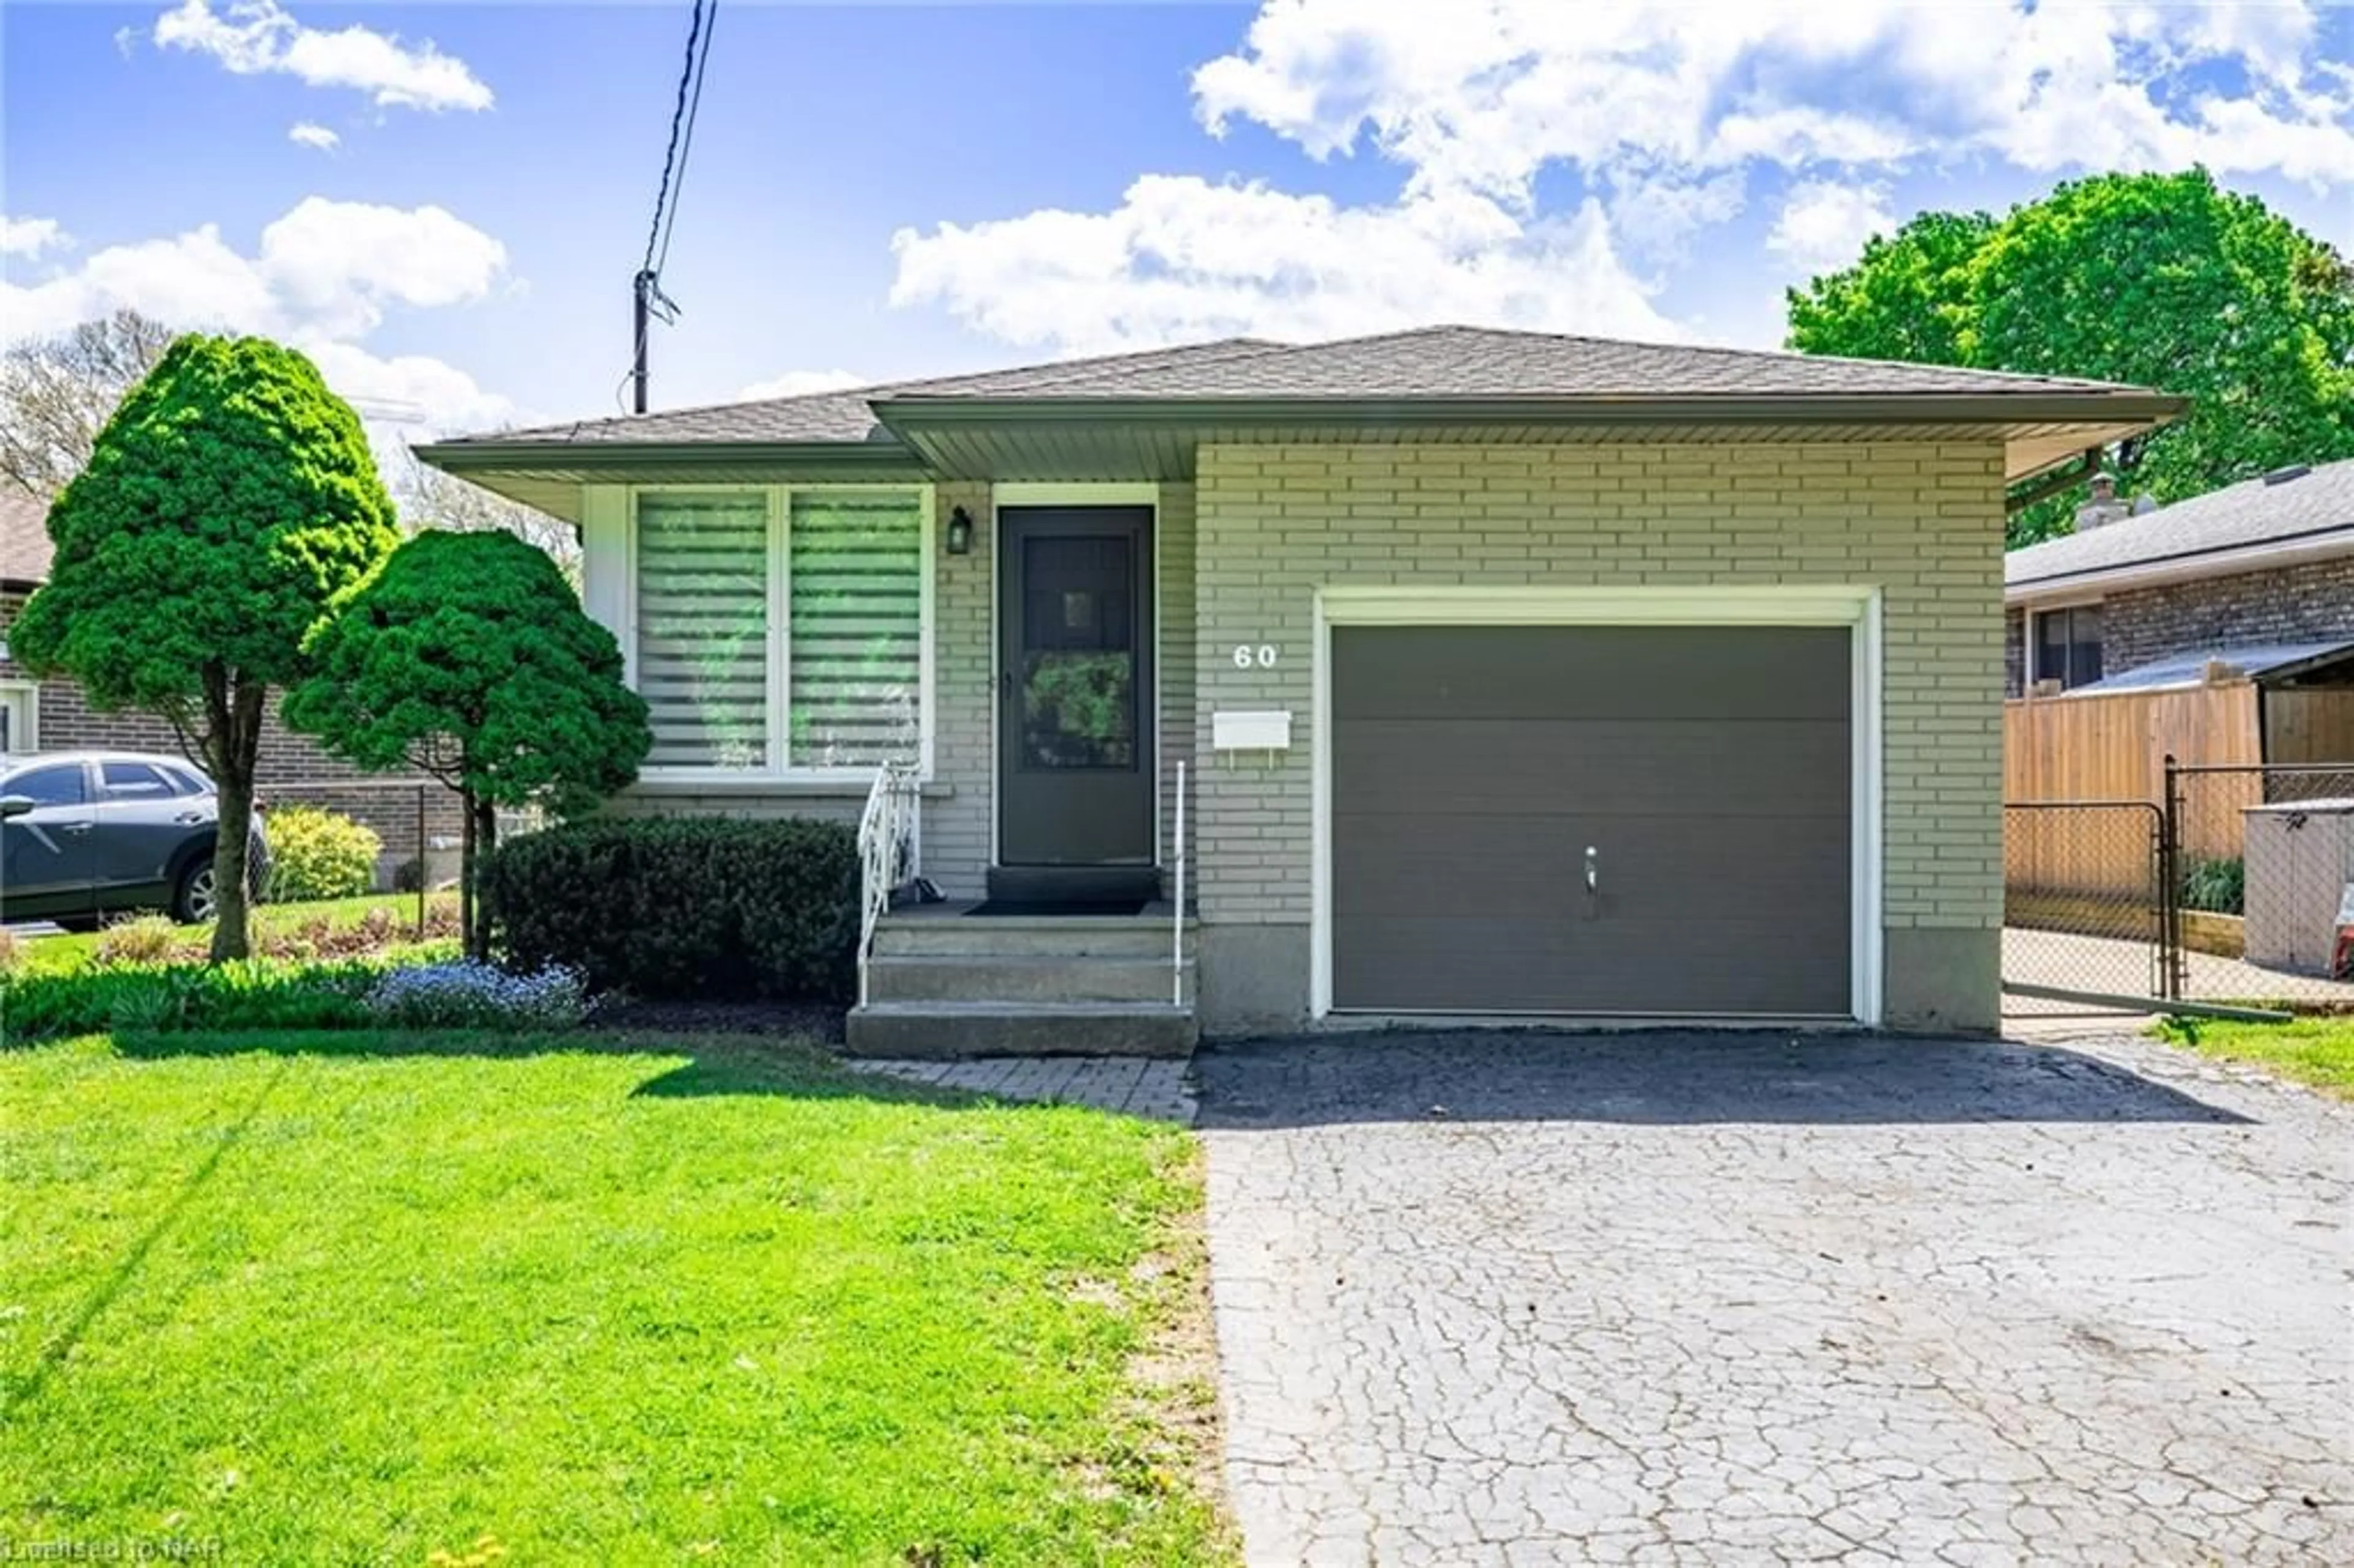 Frontside or backside of a home for 60 Pearce Ave, St. Catharines Ontario L2M 6N4